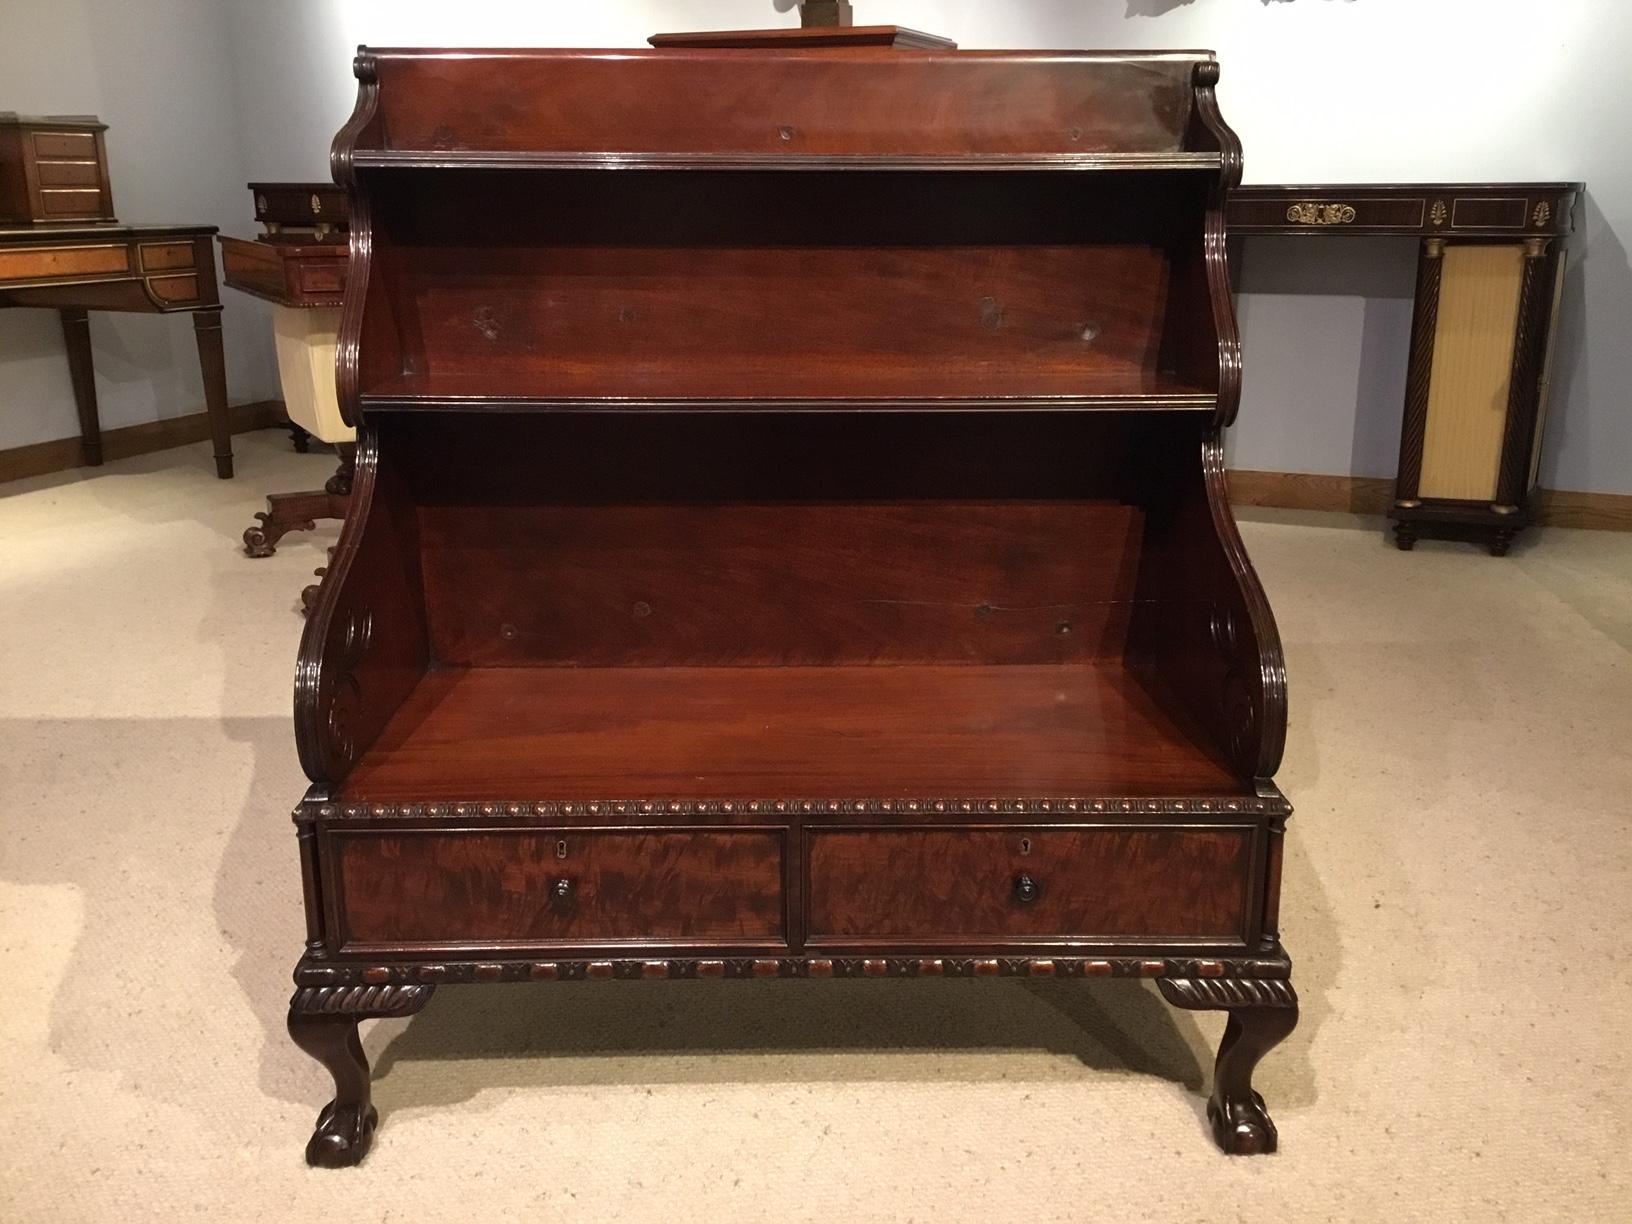 An English mahogany Regency Period waterfall bookcase. Having a Cuban mahogany back panel and two raised shelves with reeded edges, finely carved shaped ends and two mahogany line drawers to the base. The drawers veneered in the finest figured